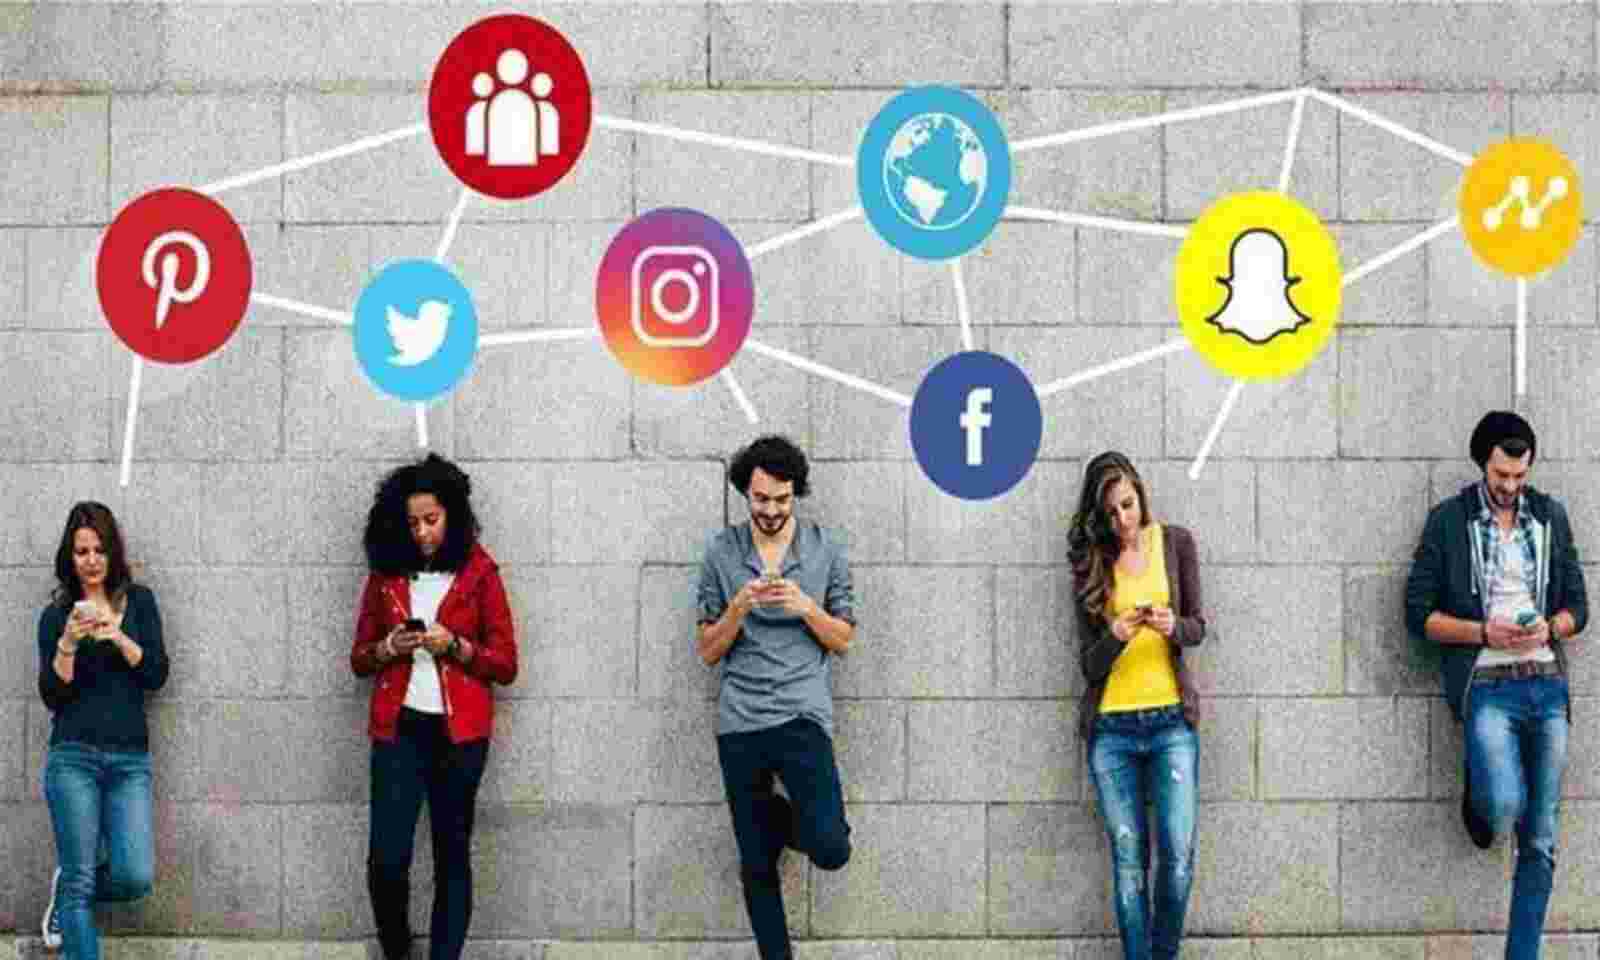 Indiscriminate use of social media by students